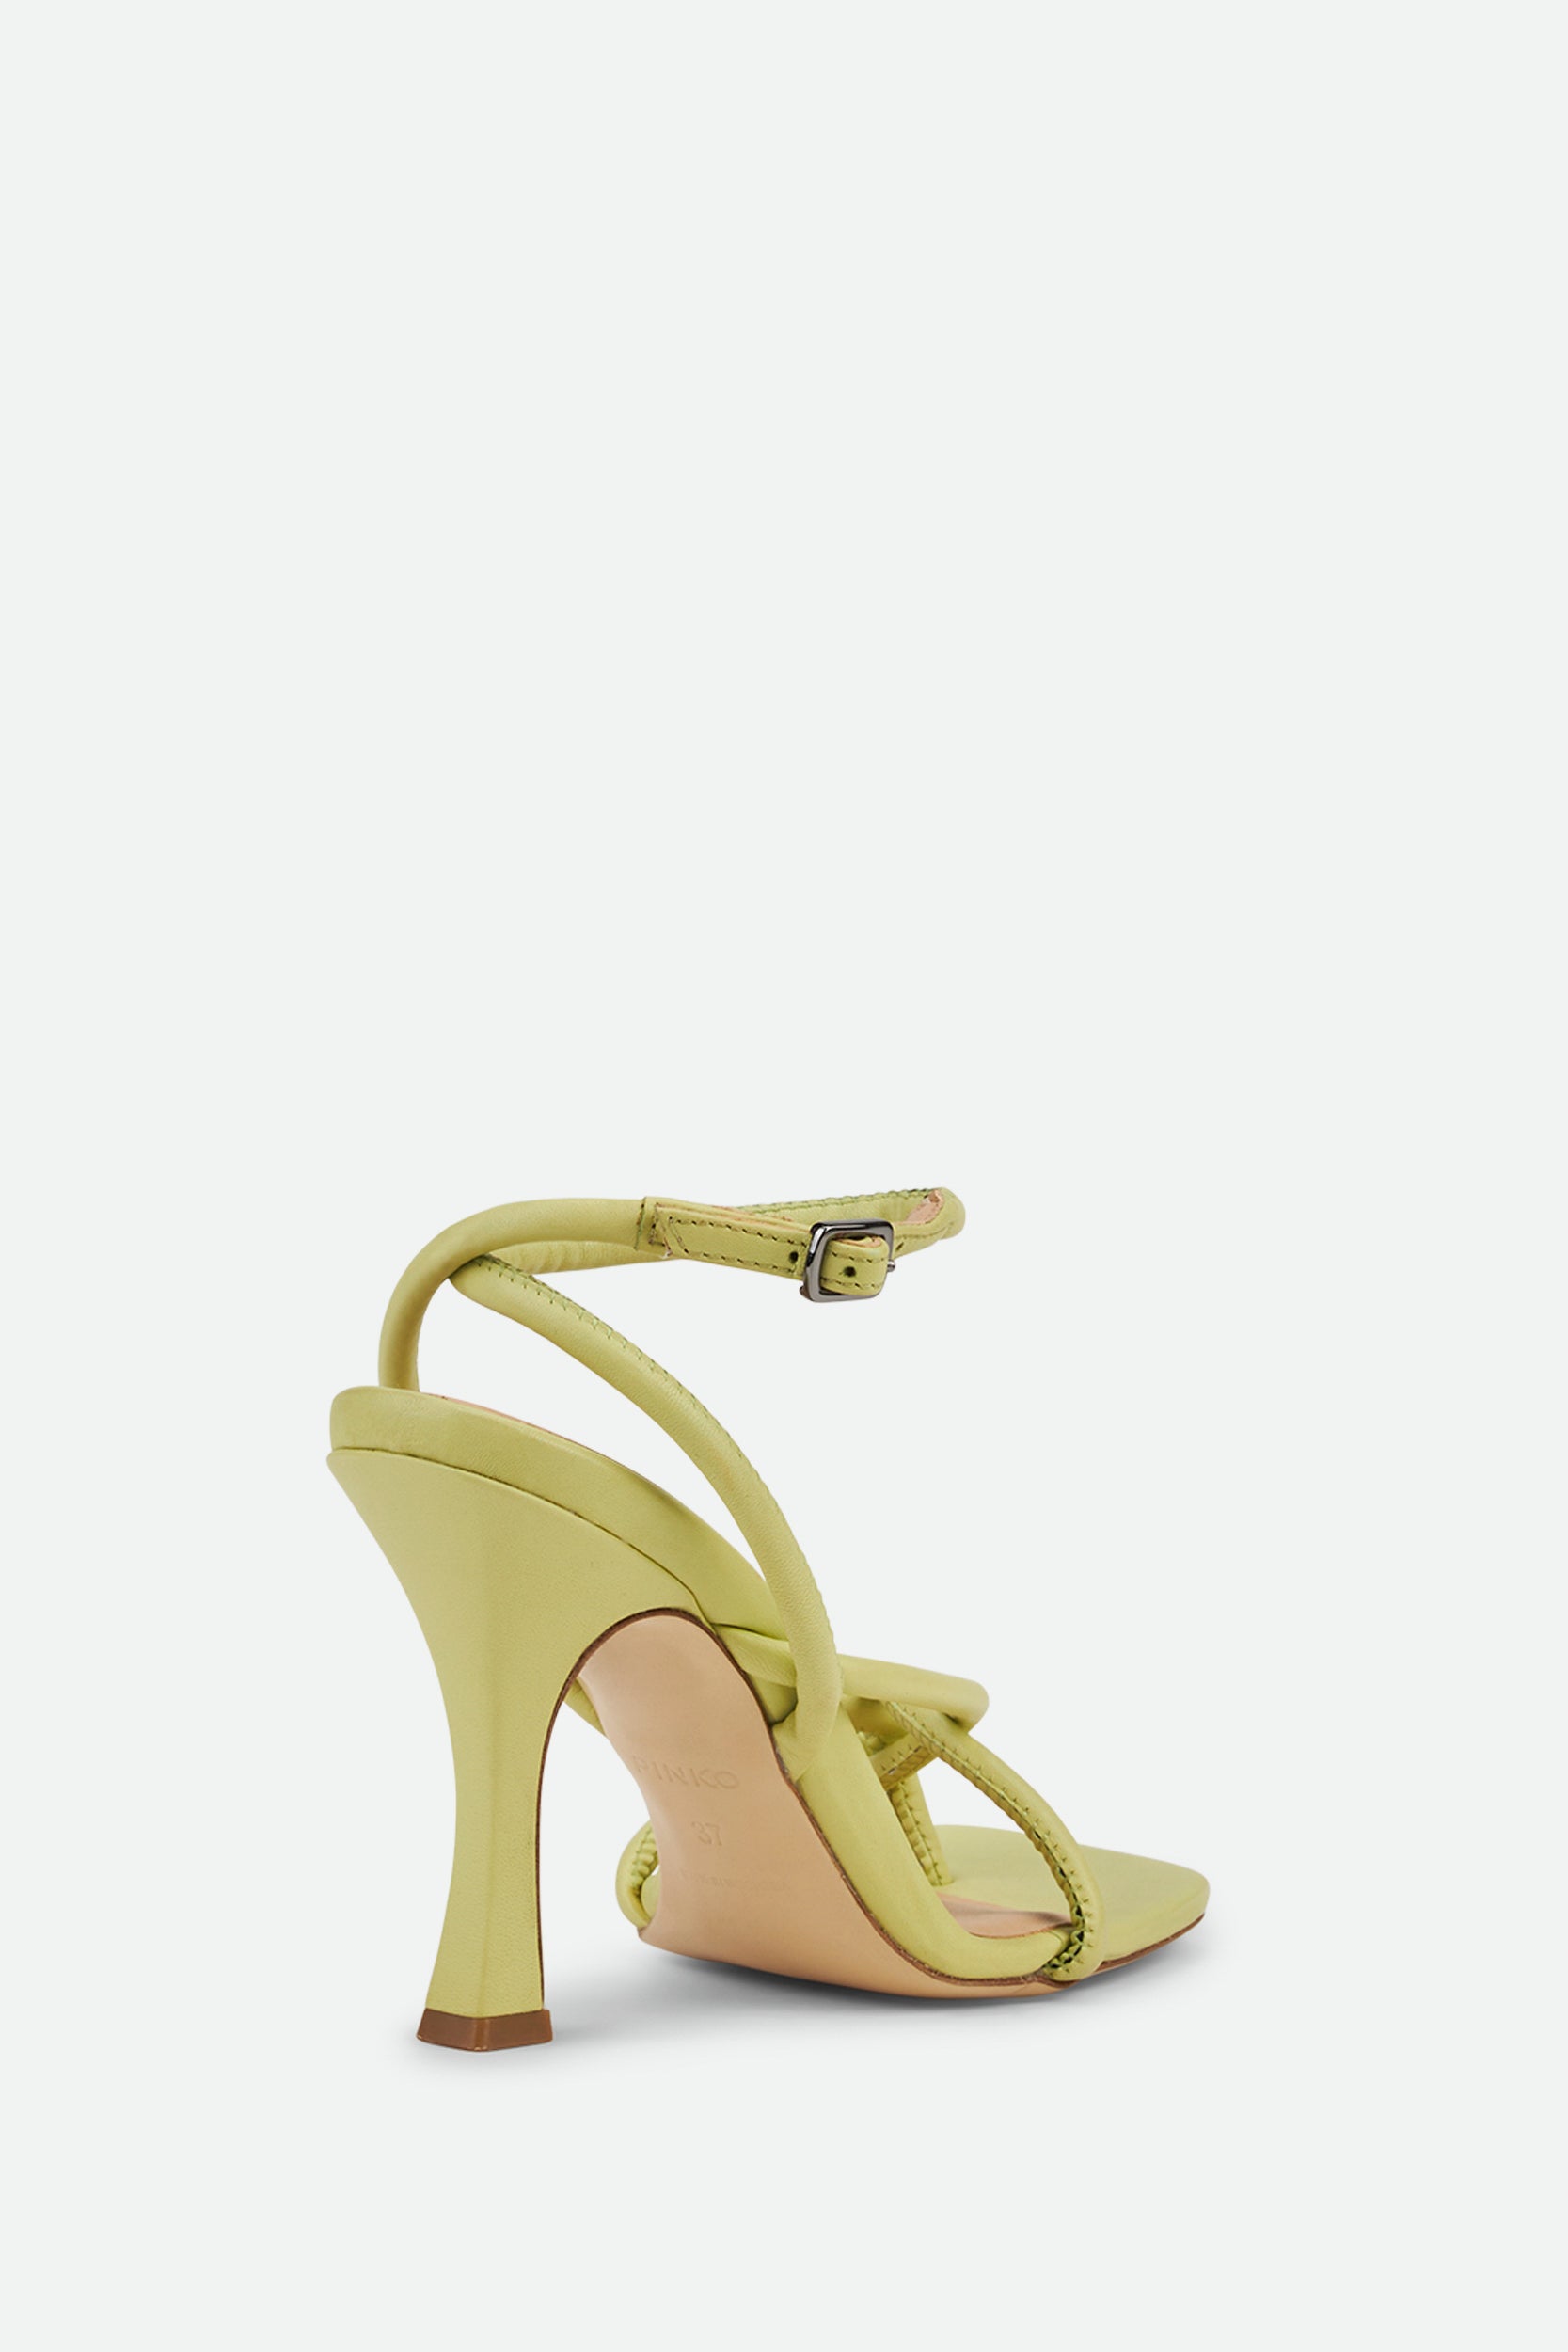 Pinko Sandal in Lime Leather